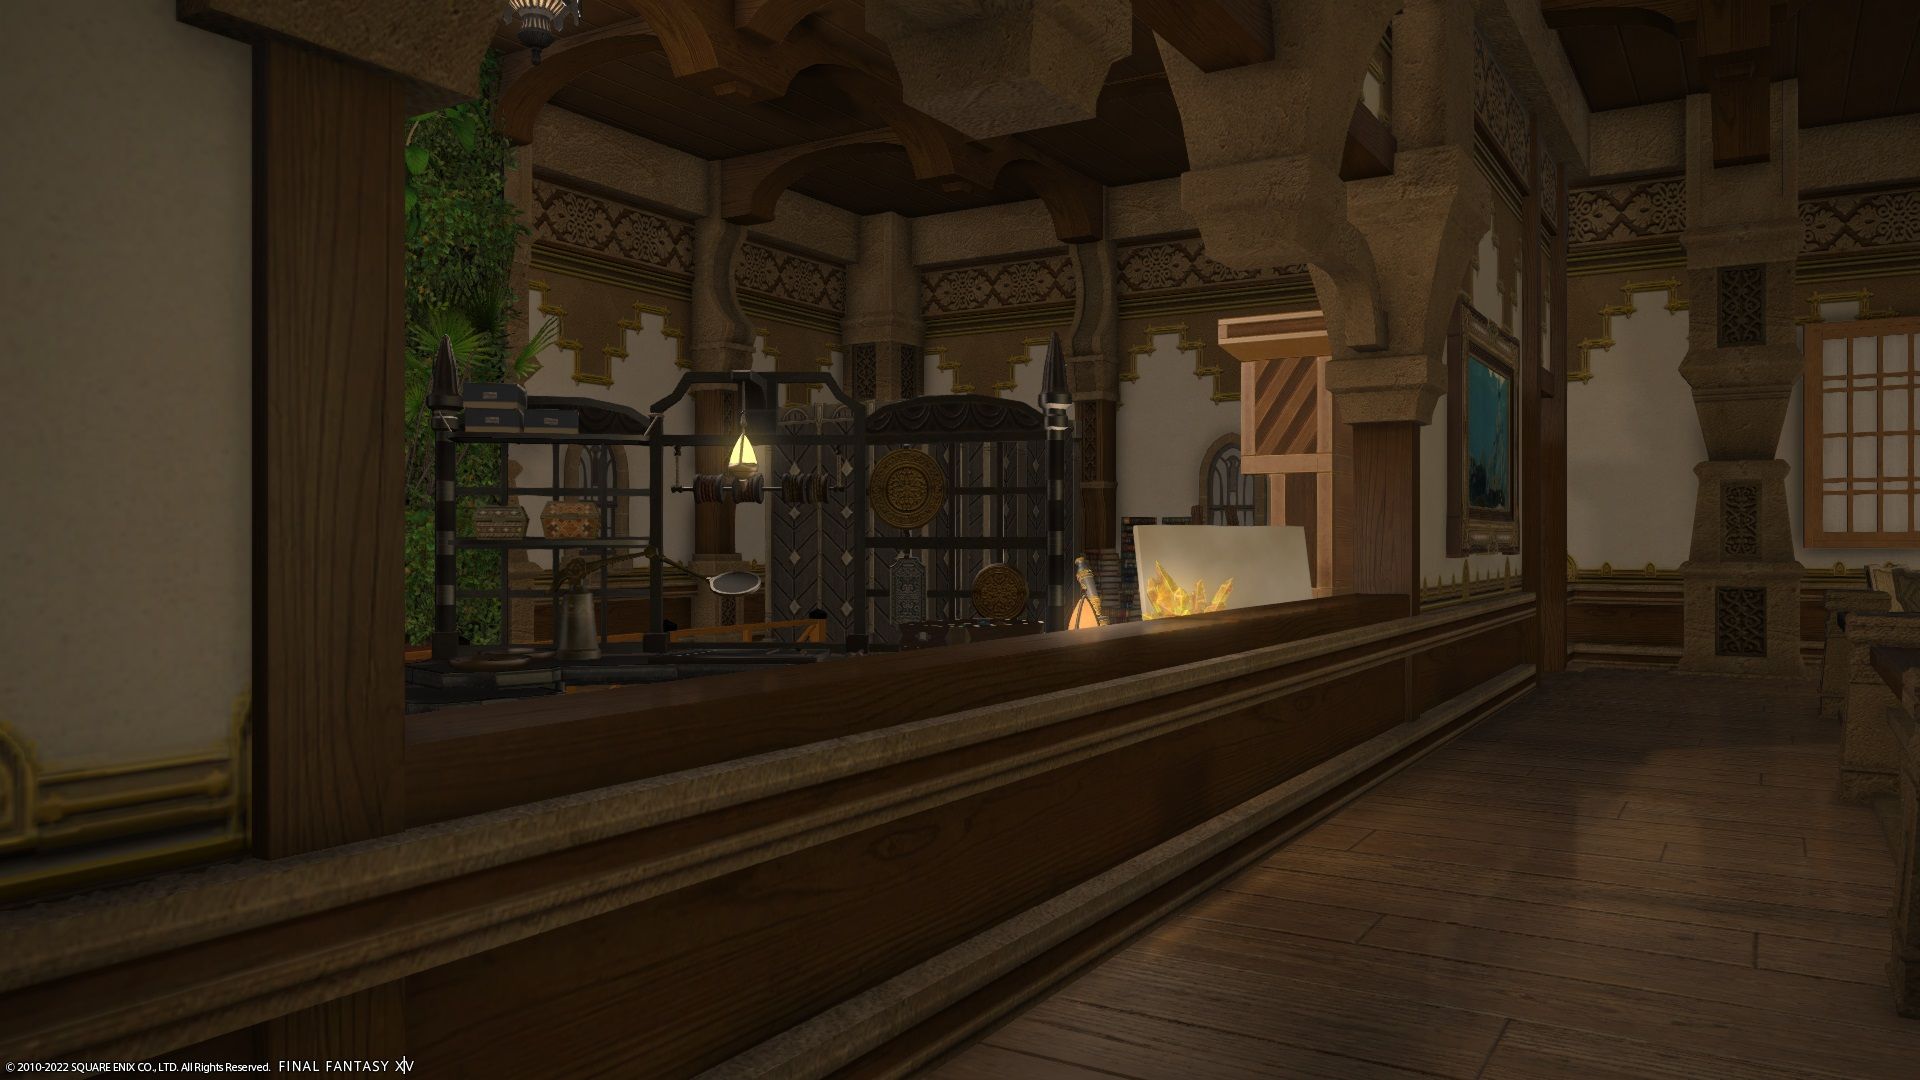 The Final Fantasy 14 Nature Museum upstairs area